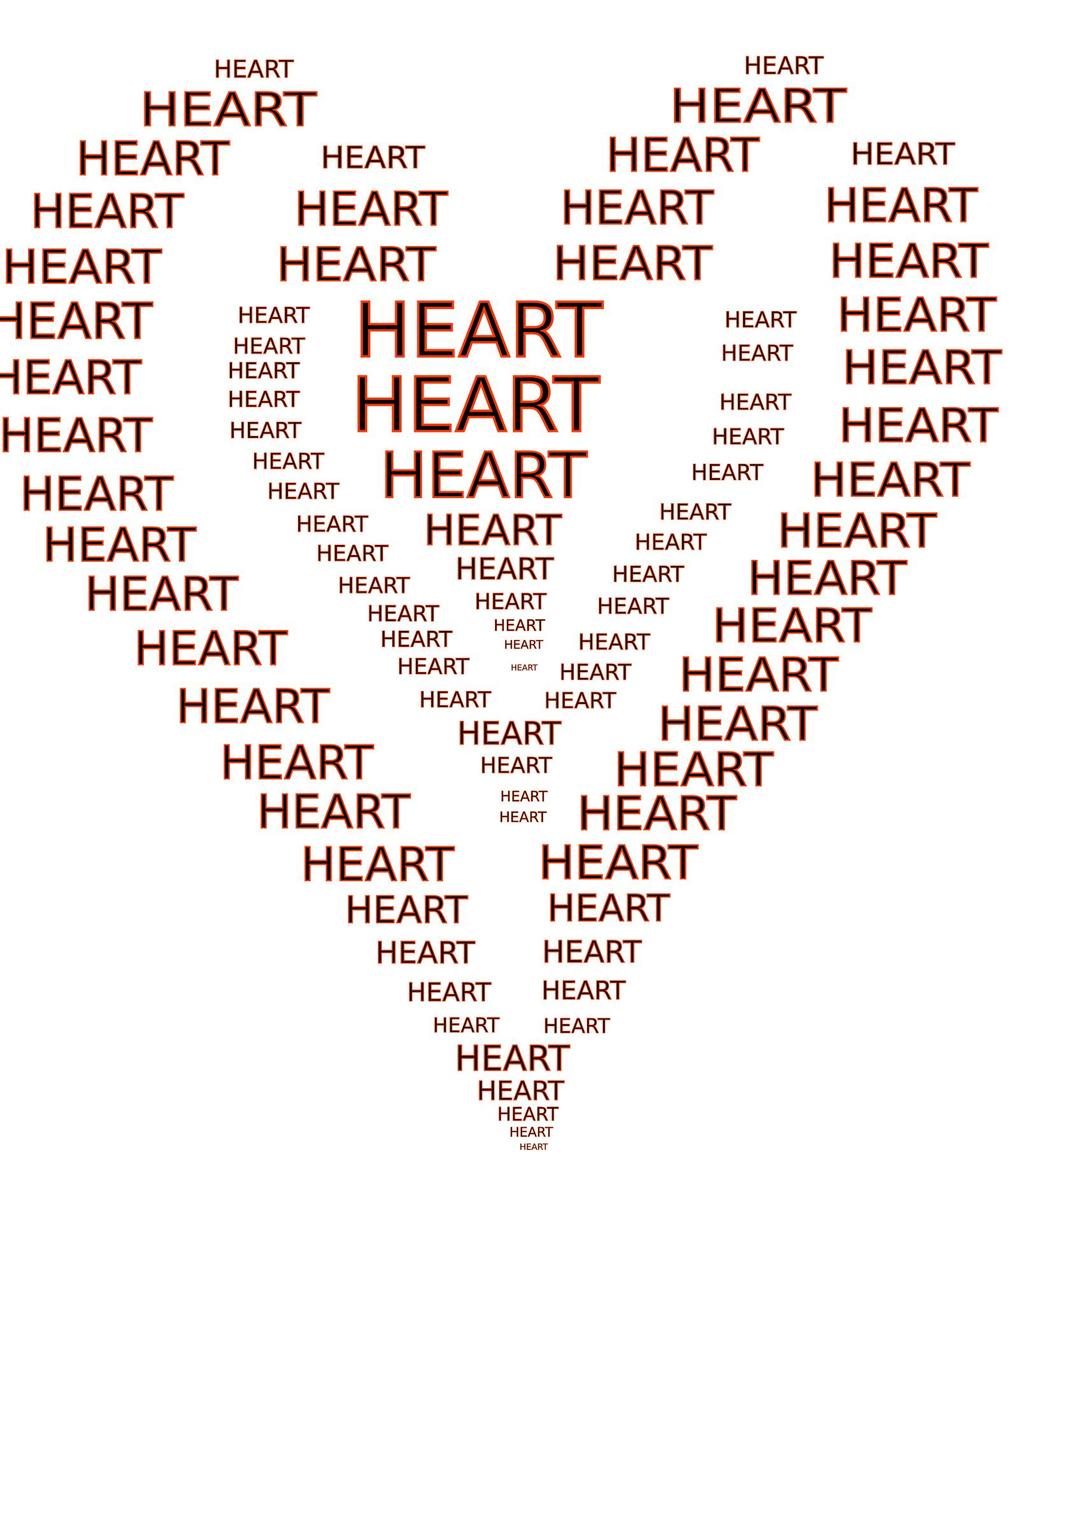 Heart figure done by words png transparent